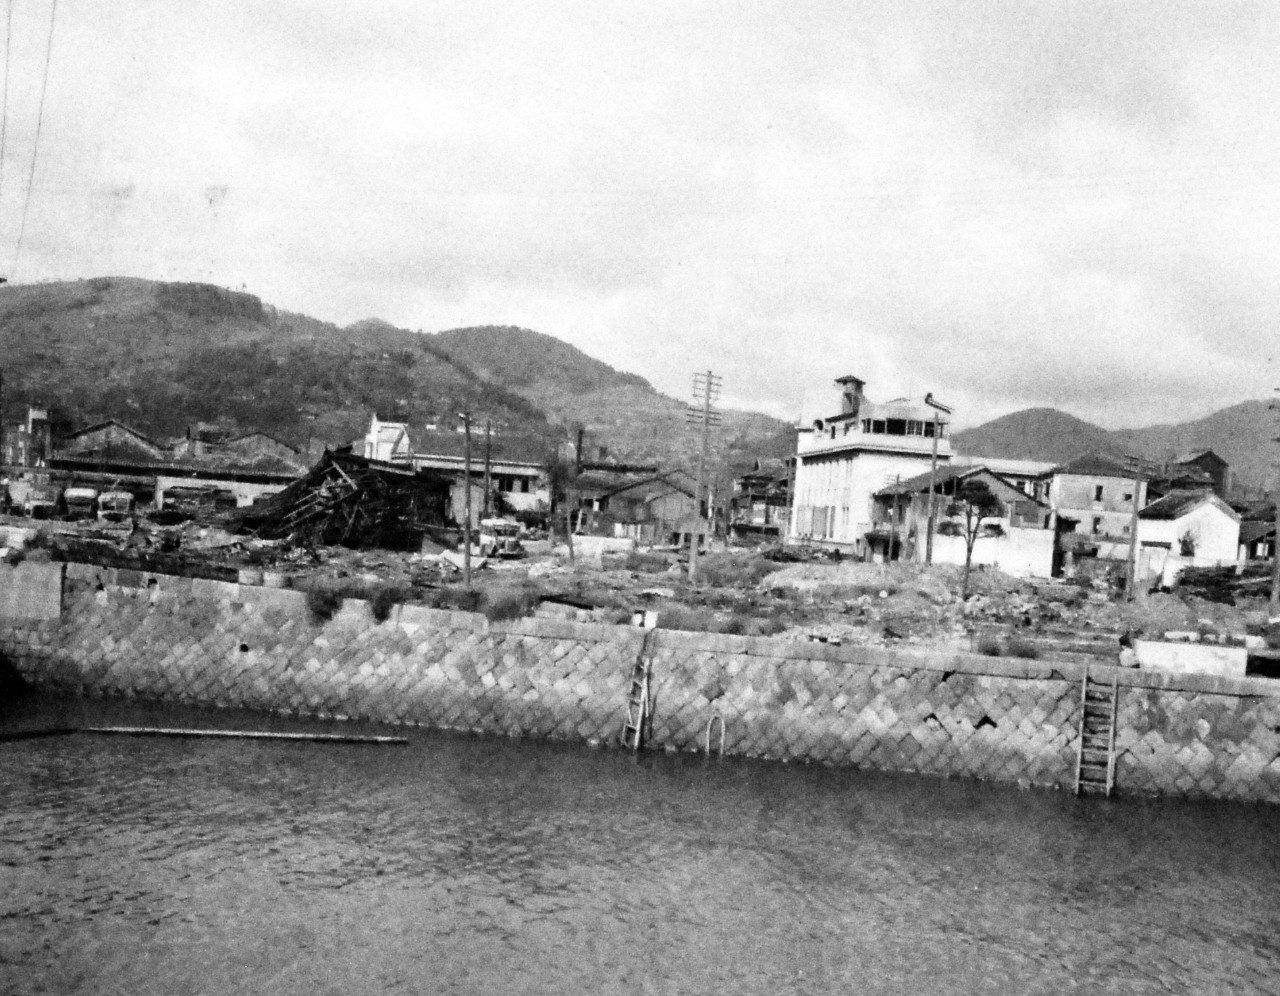 80-G-346553:  Nagasaki, Japan, 1945.   Atomic bomb damage to building at Nagasaki, Japan.  Photographed by crew of USS Chenango (CVE-28), September 13, 1945.    Official U.S. Navy photograph, now in the collections of the National Archives.   (2014/11/5).